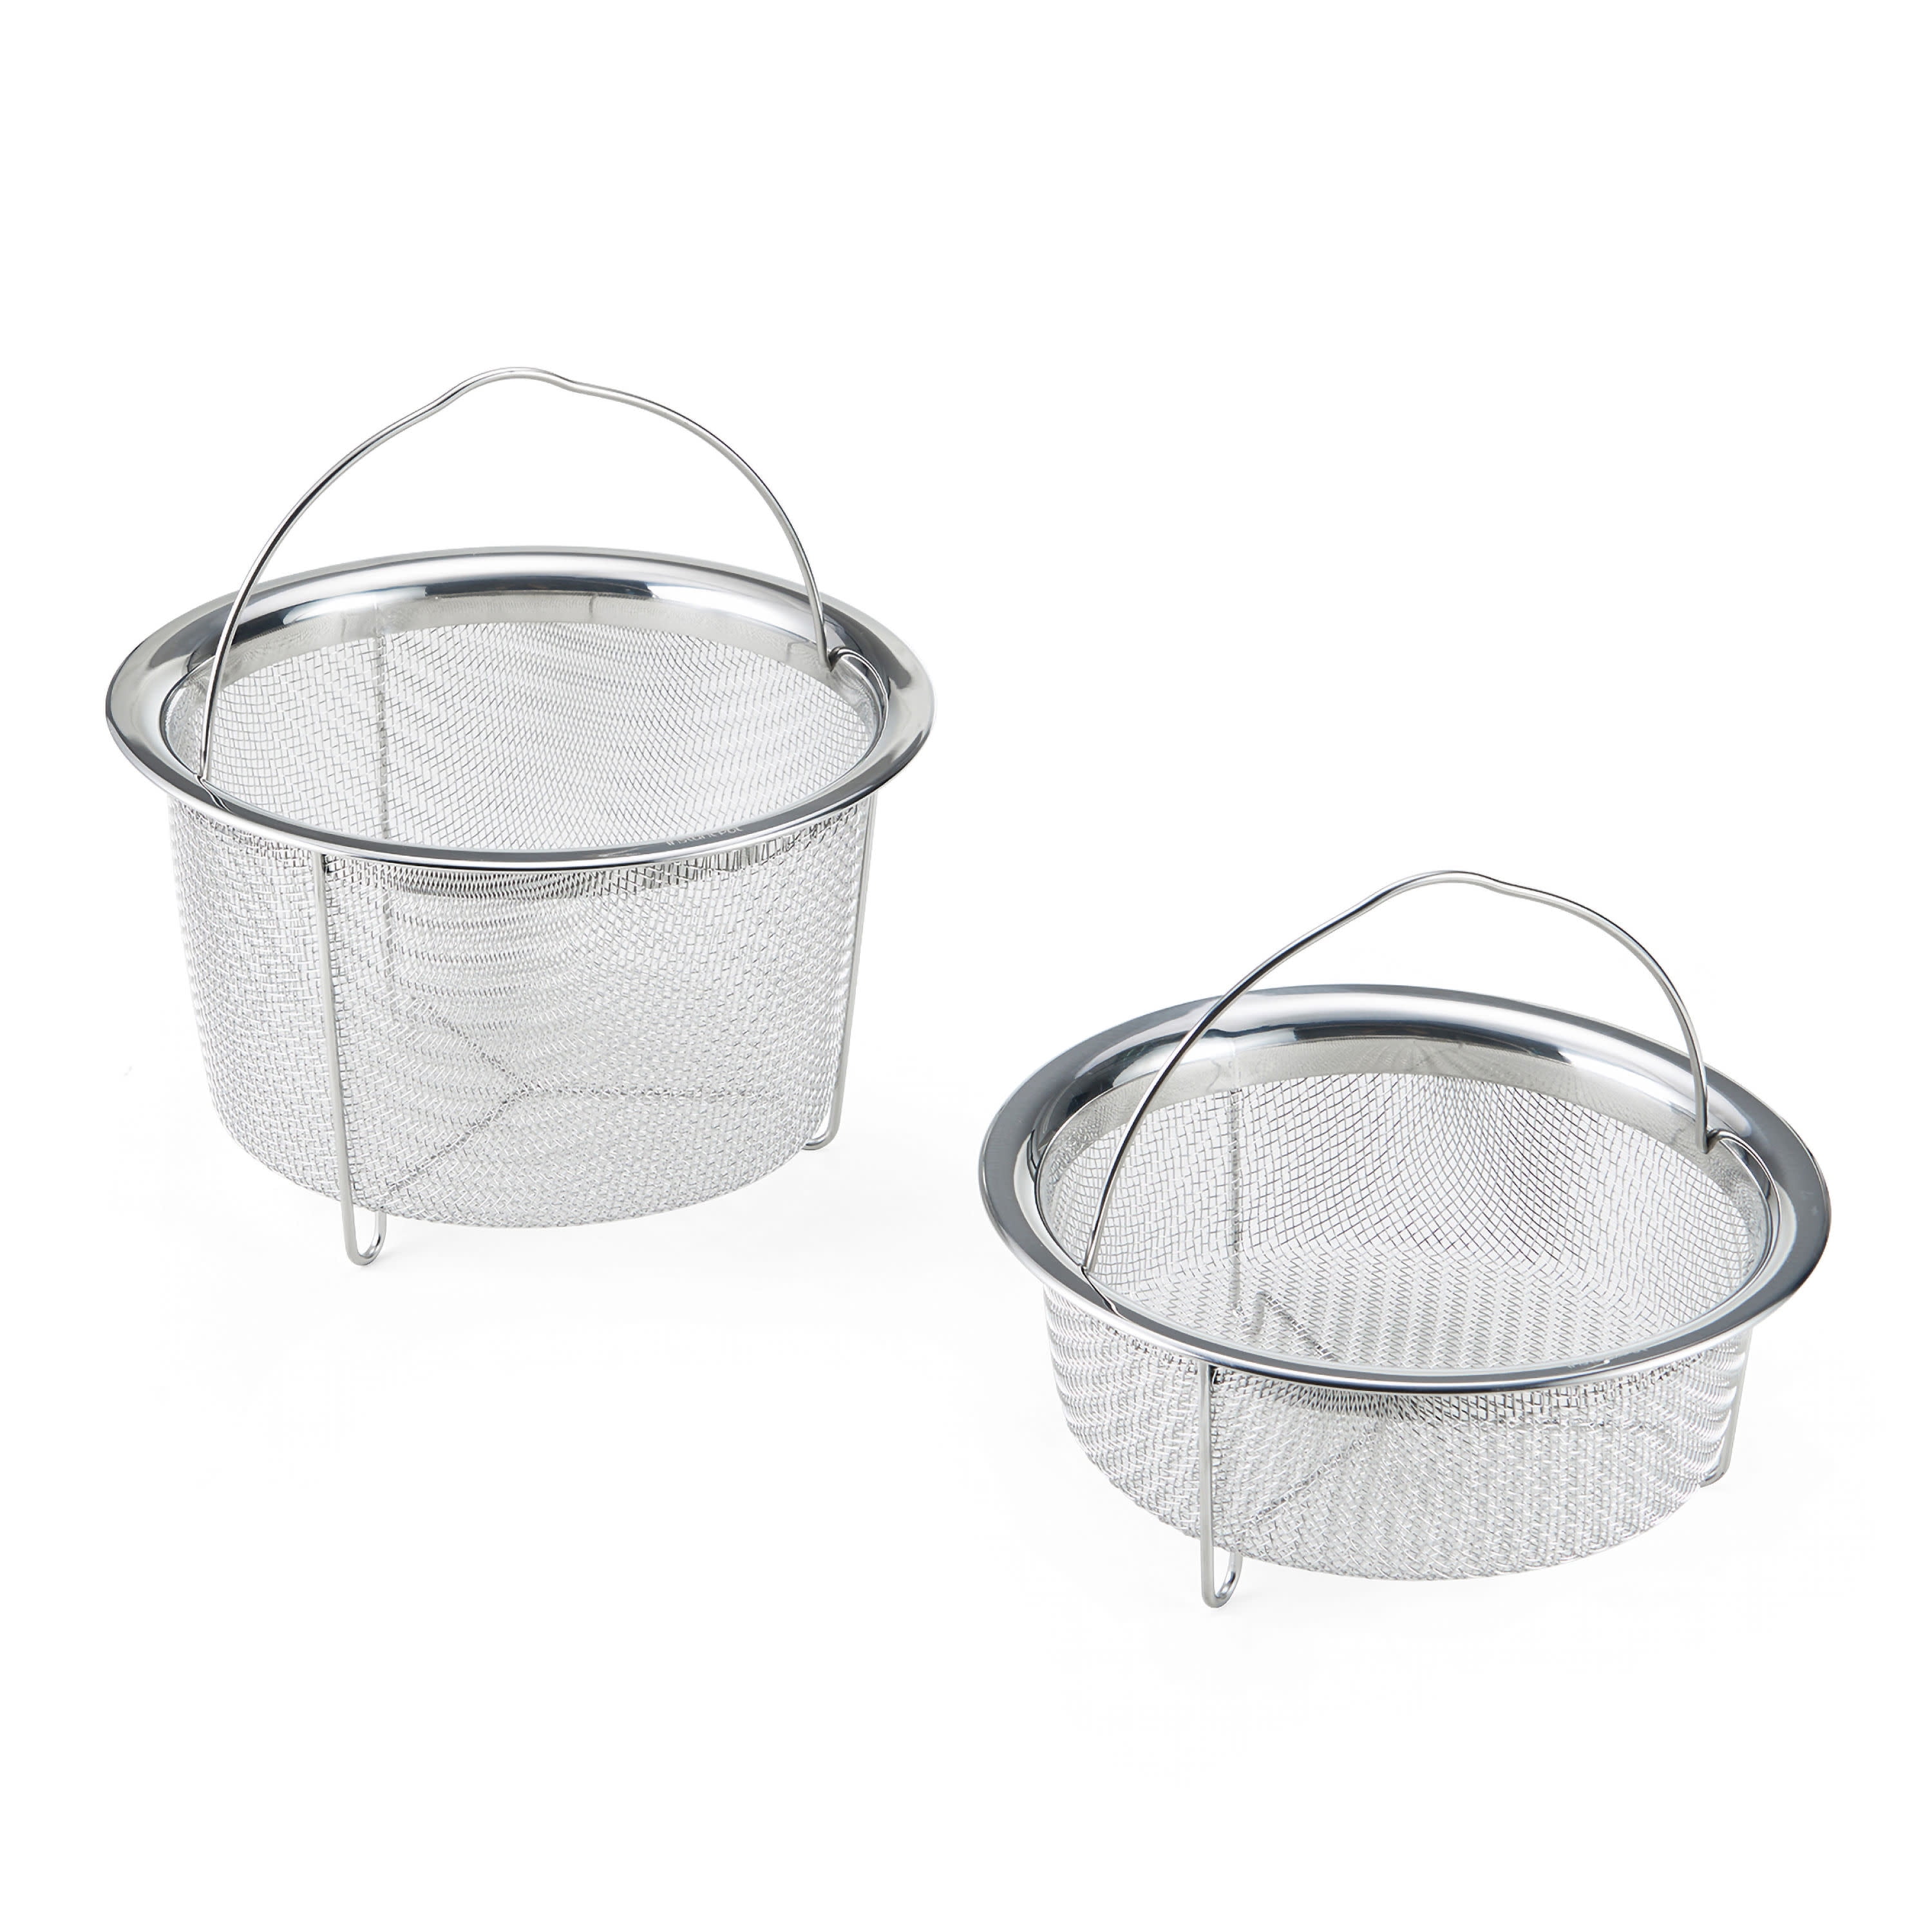 Instant Pot® Large Mesh Steamer Basket, 1 unit - Mariano's